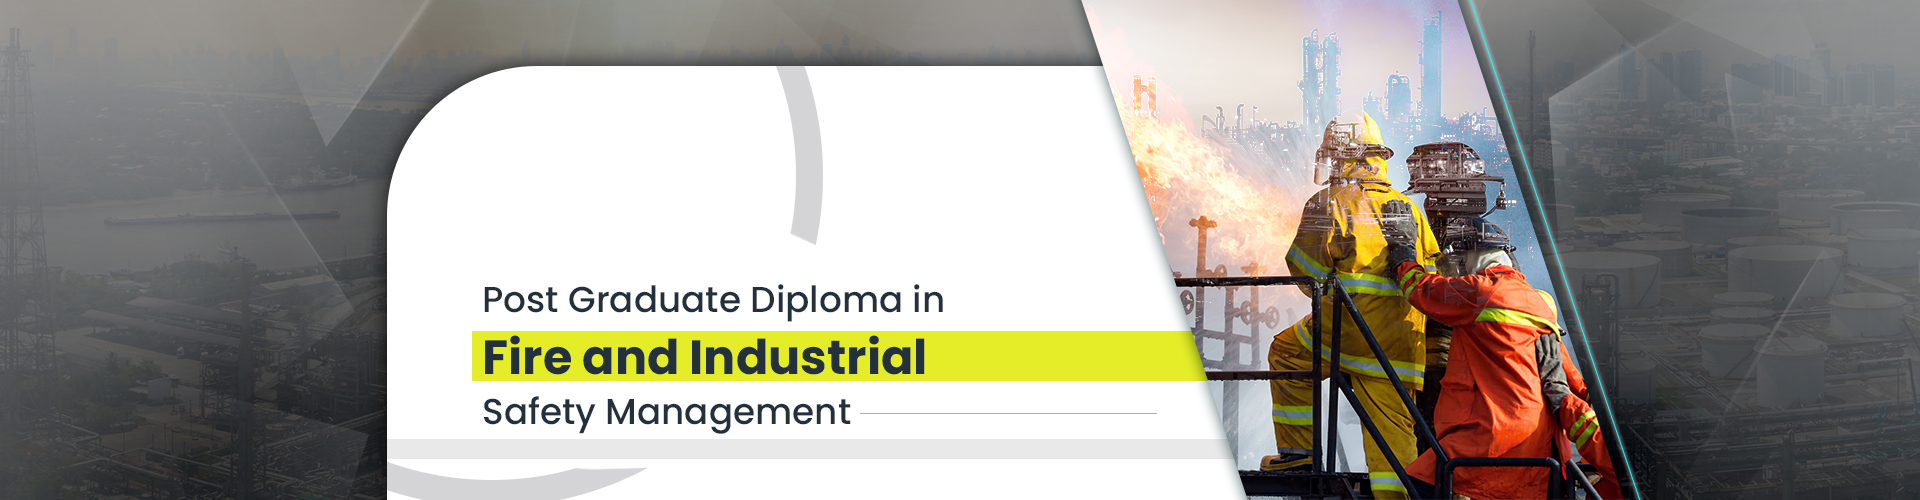 Post Graduate Diploma in Fire and Industrial Safety